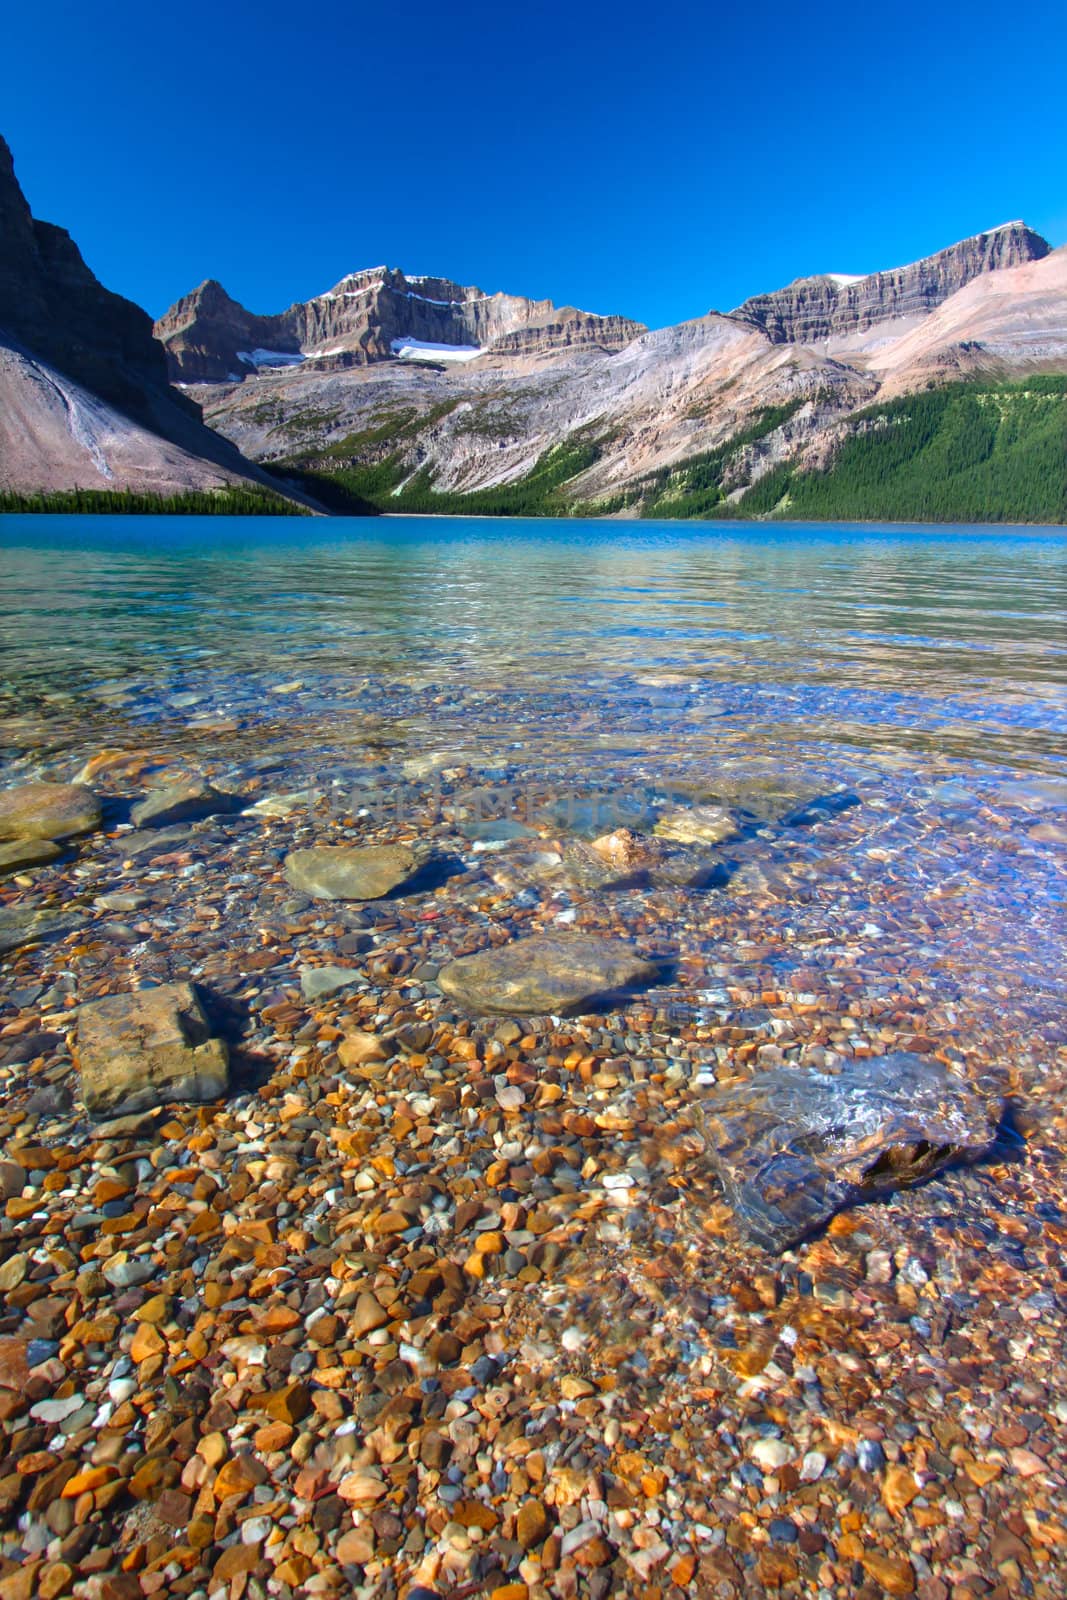 Rocky substrate visible under clear waters of Bow Lake in Banff National Park of Canada.